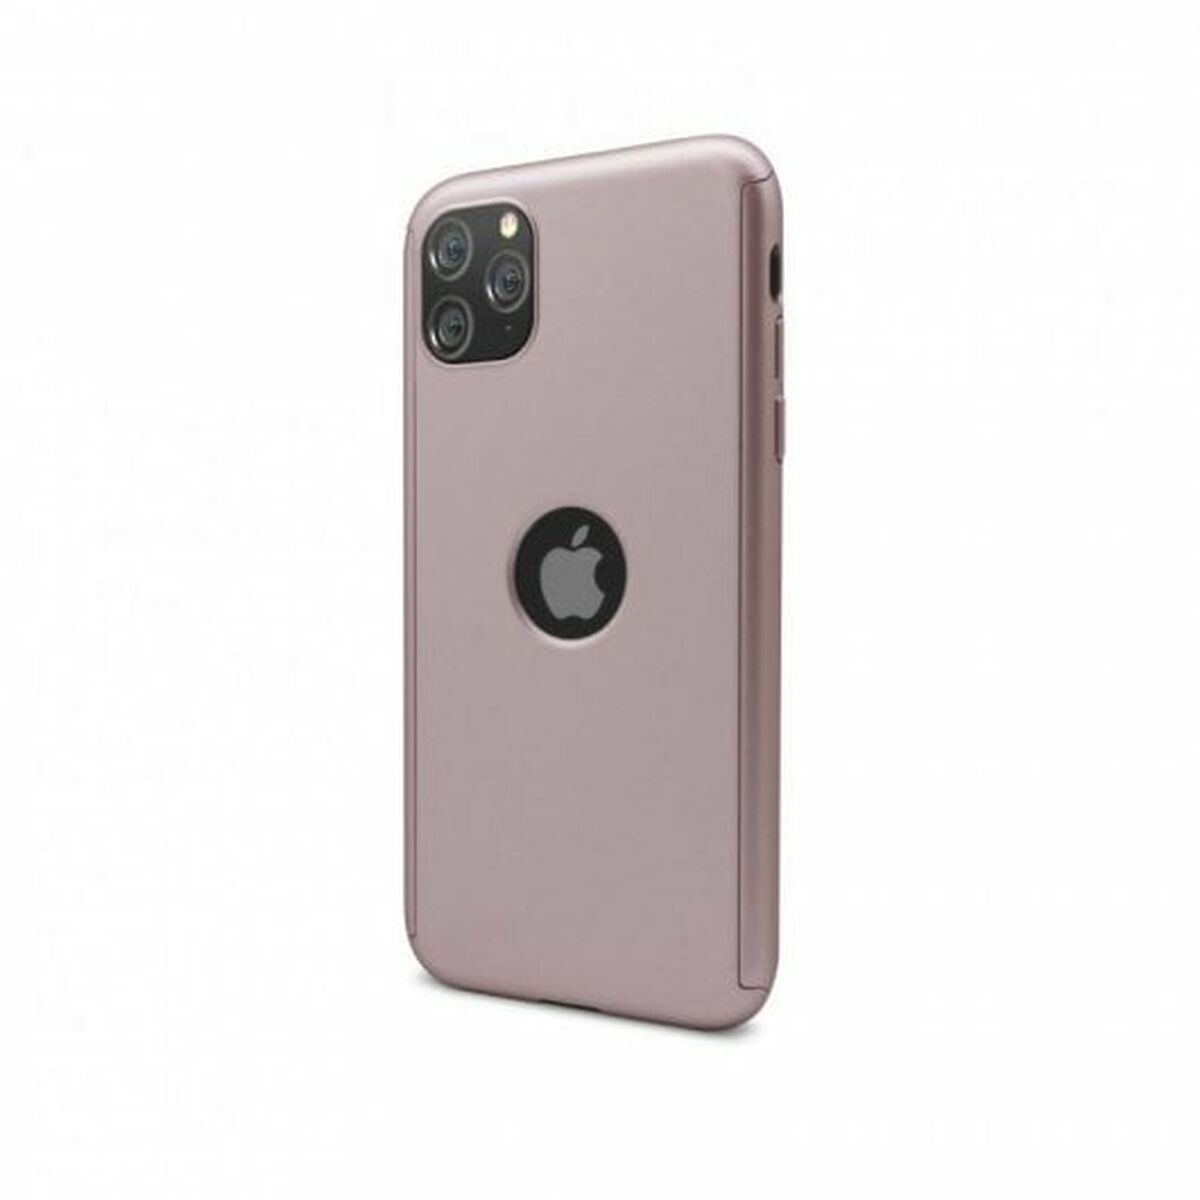 Mobile cover Nueboo iPhone 11 Pro Pink Apple